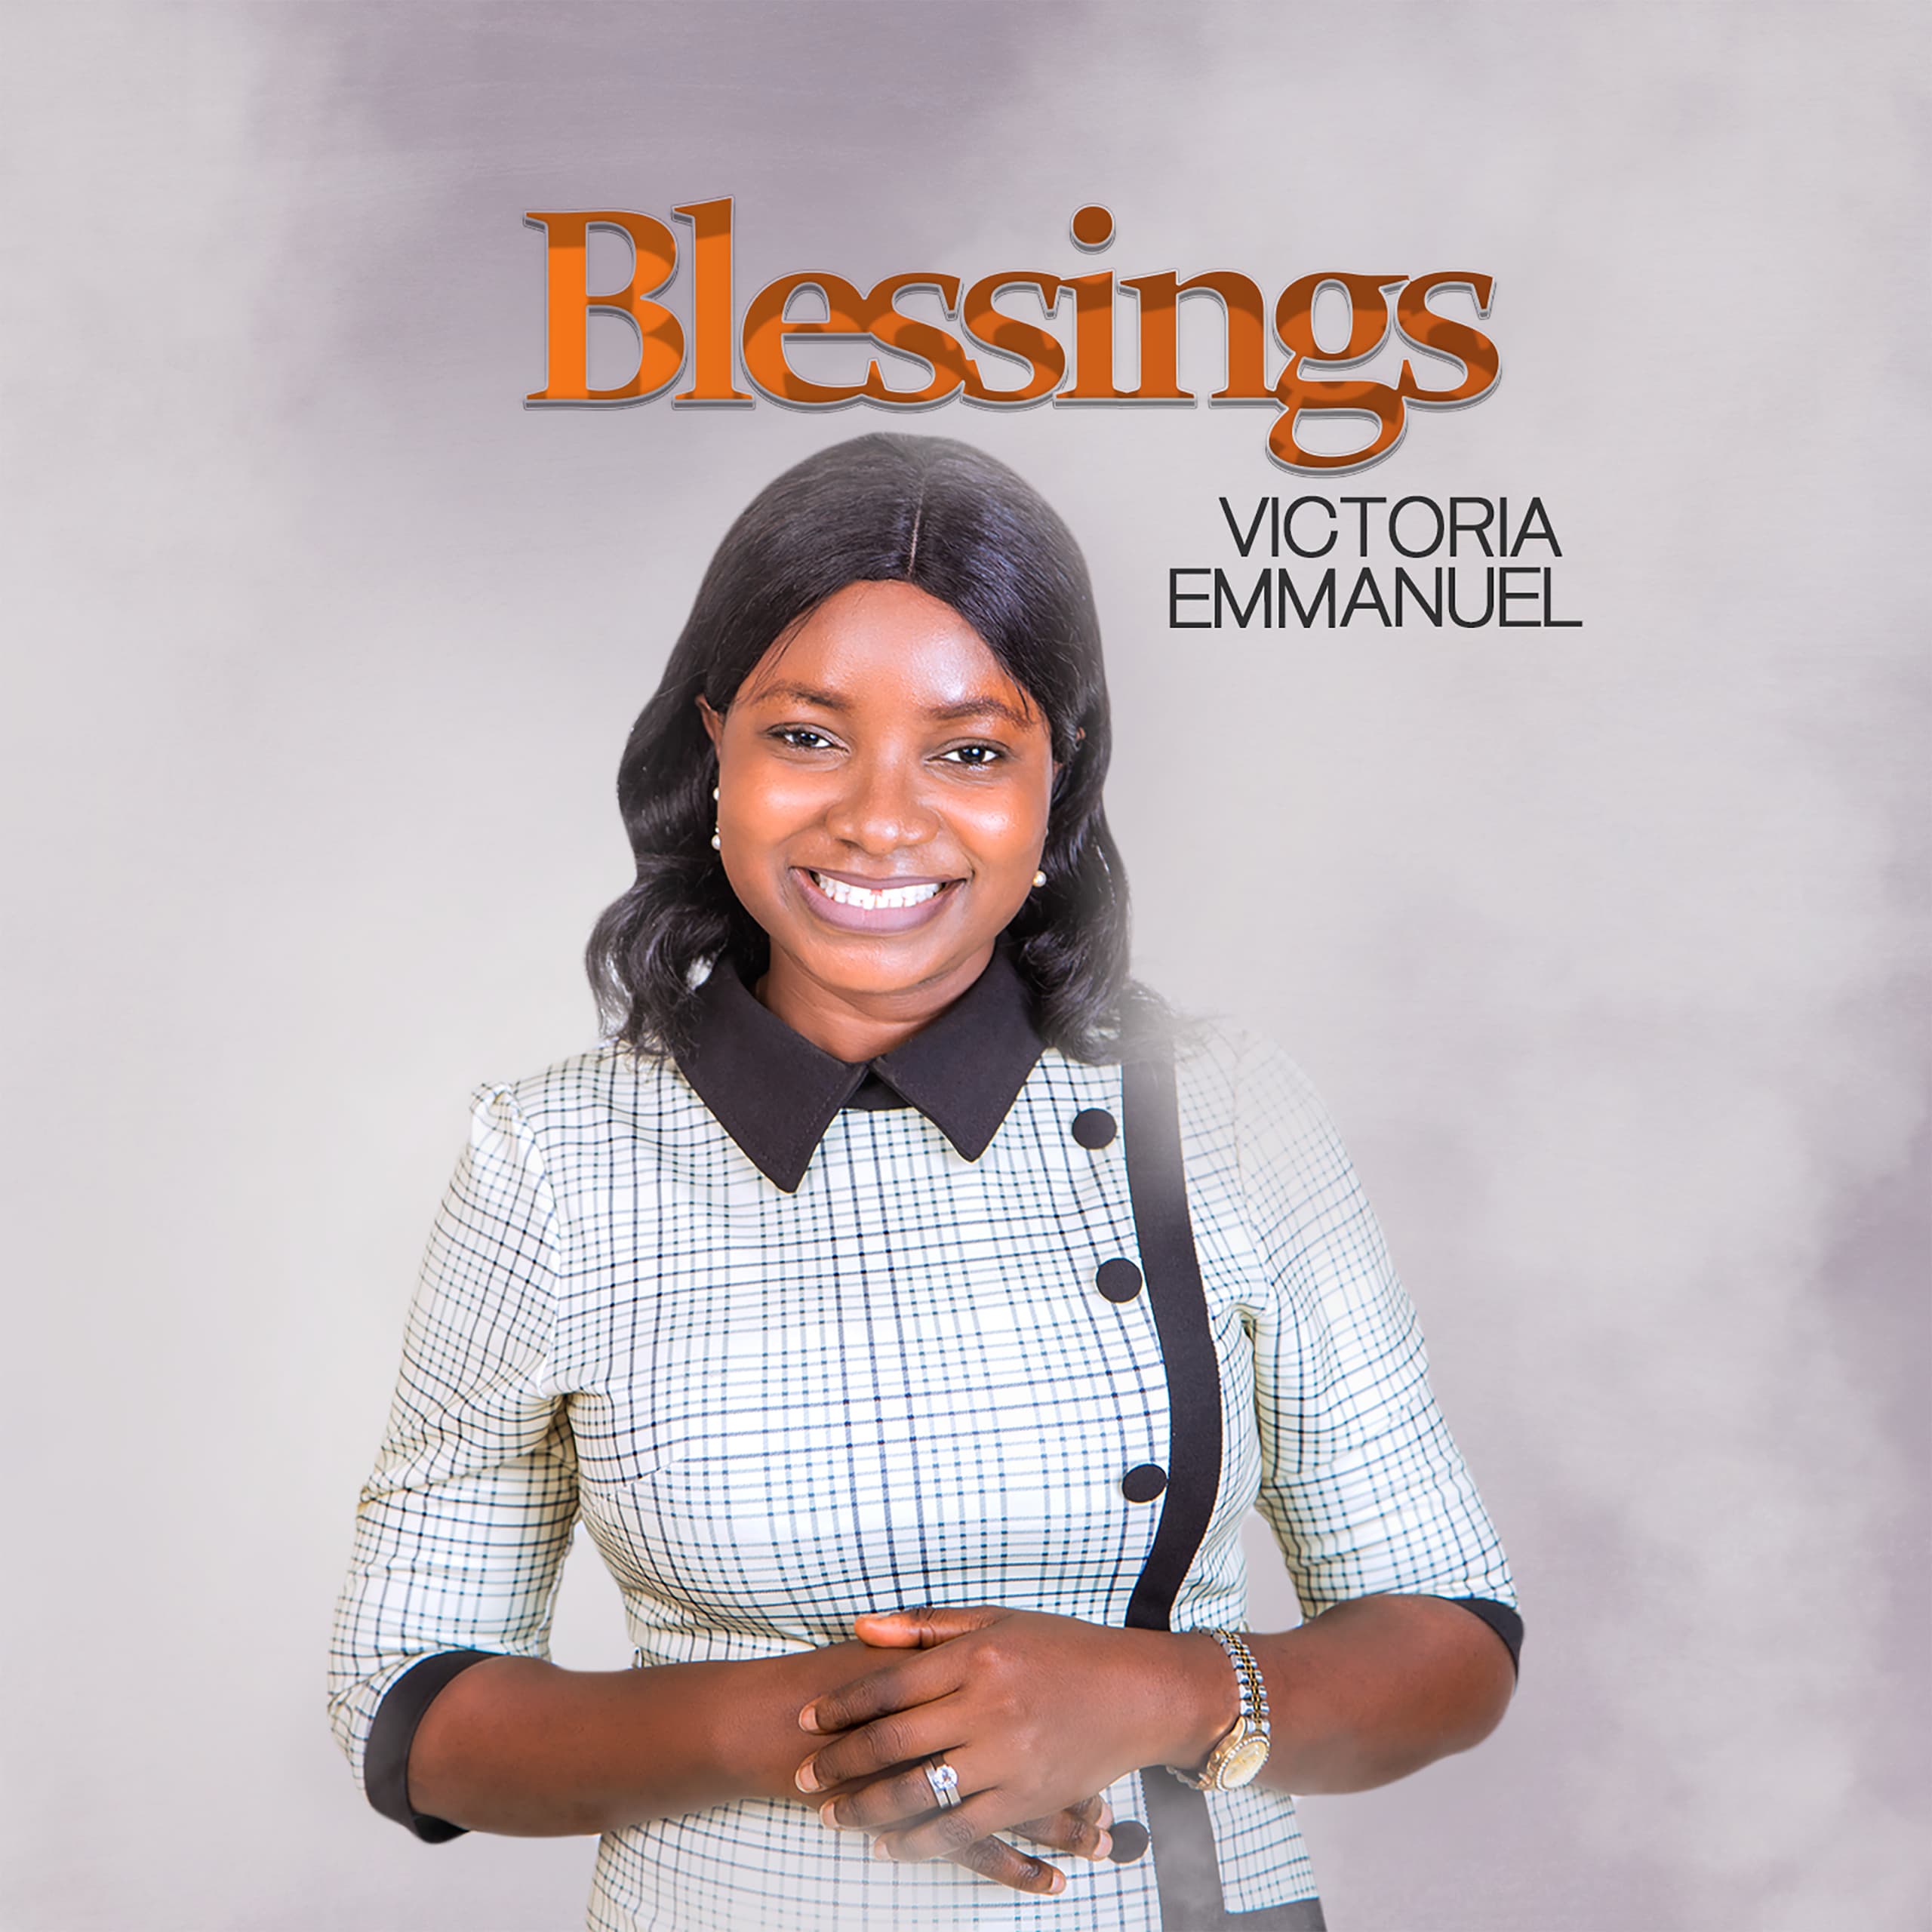 Blessings by Victoria Emmanuel